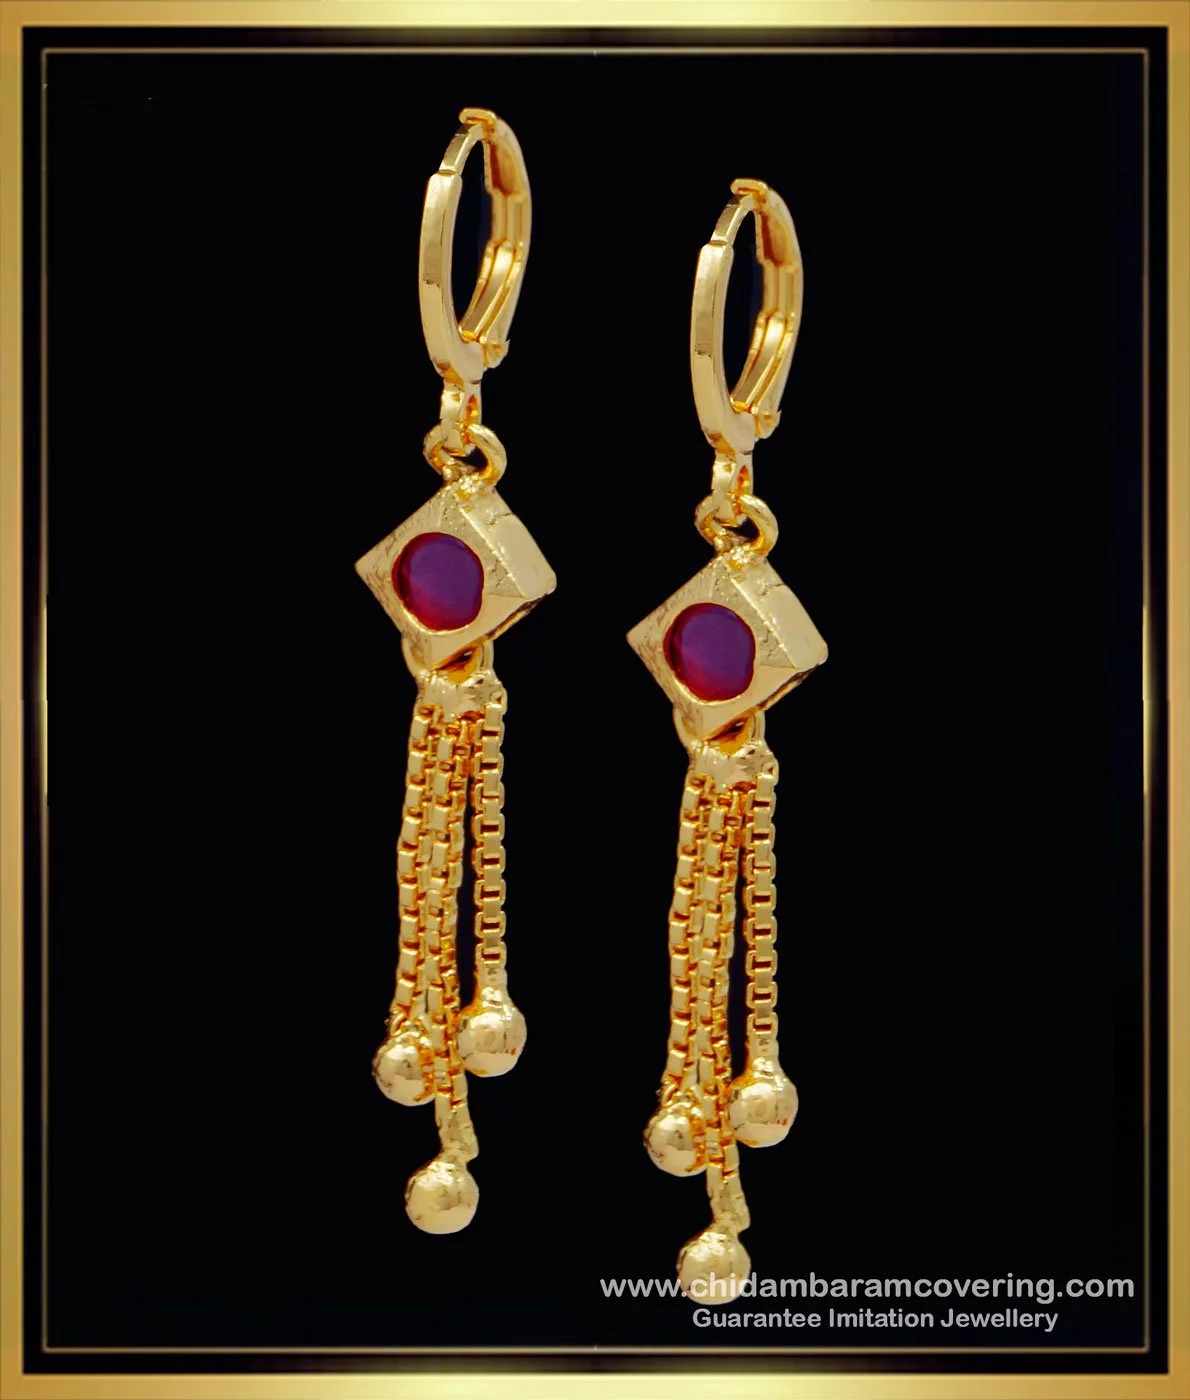 ERG139 - Long Chain Drops Earring Designs 1 Gram Gold Jewelry Online - Buy  Original Chidambaram Covering product at Wholesale Price. Online shopping  for guarantee South Indian Gold Plated Jewellery.